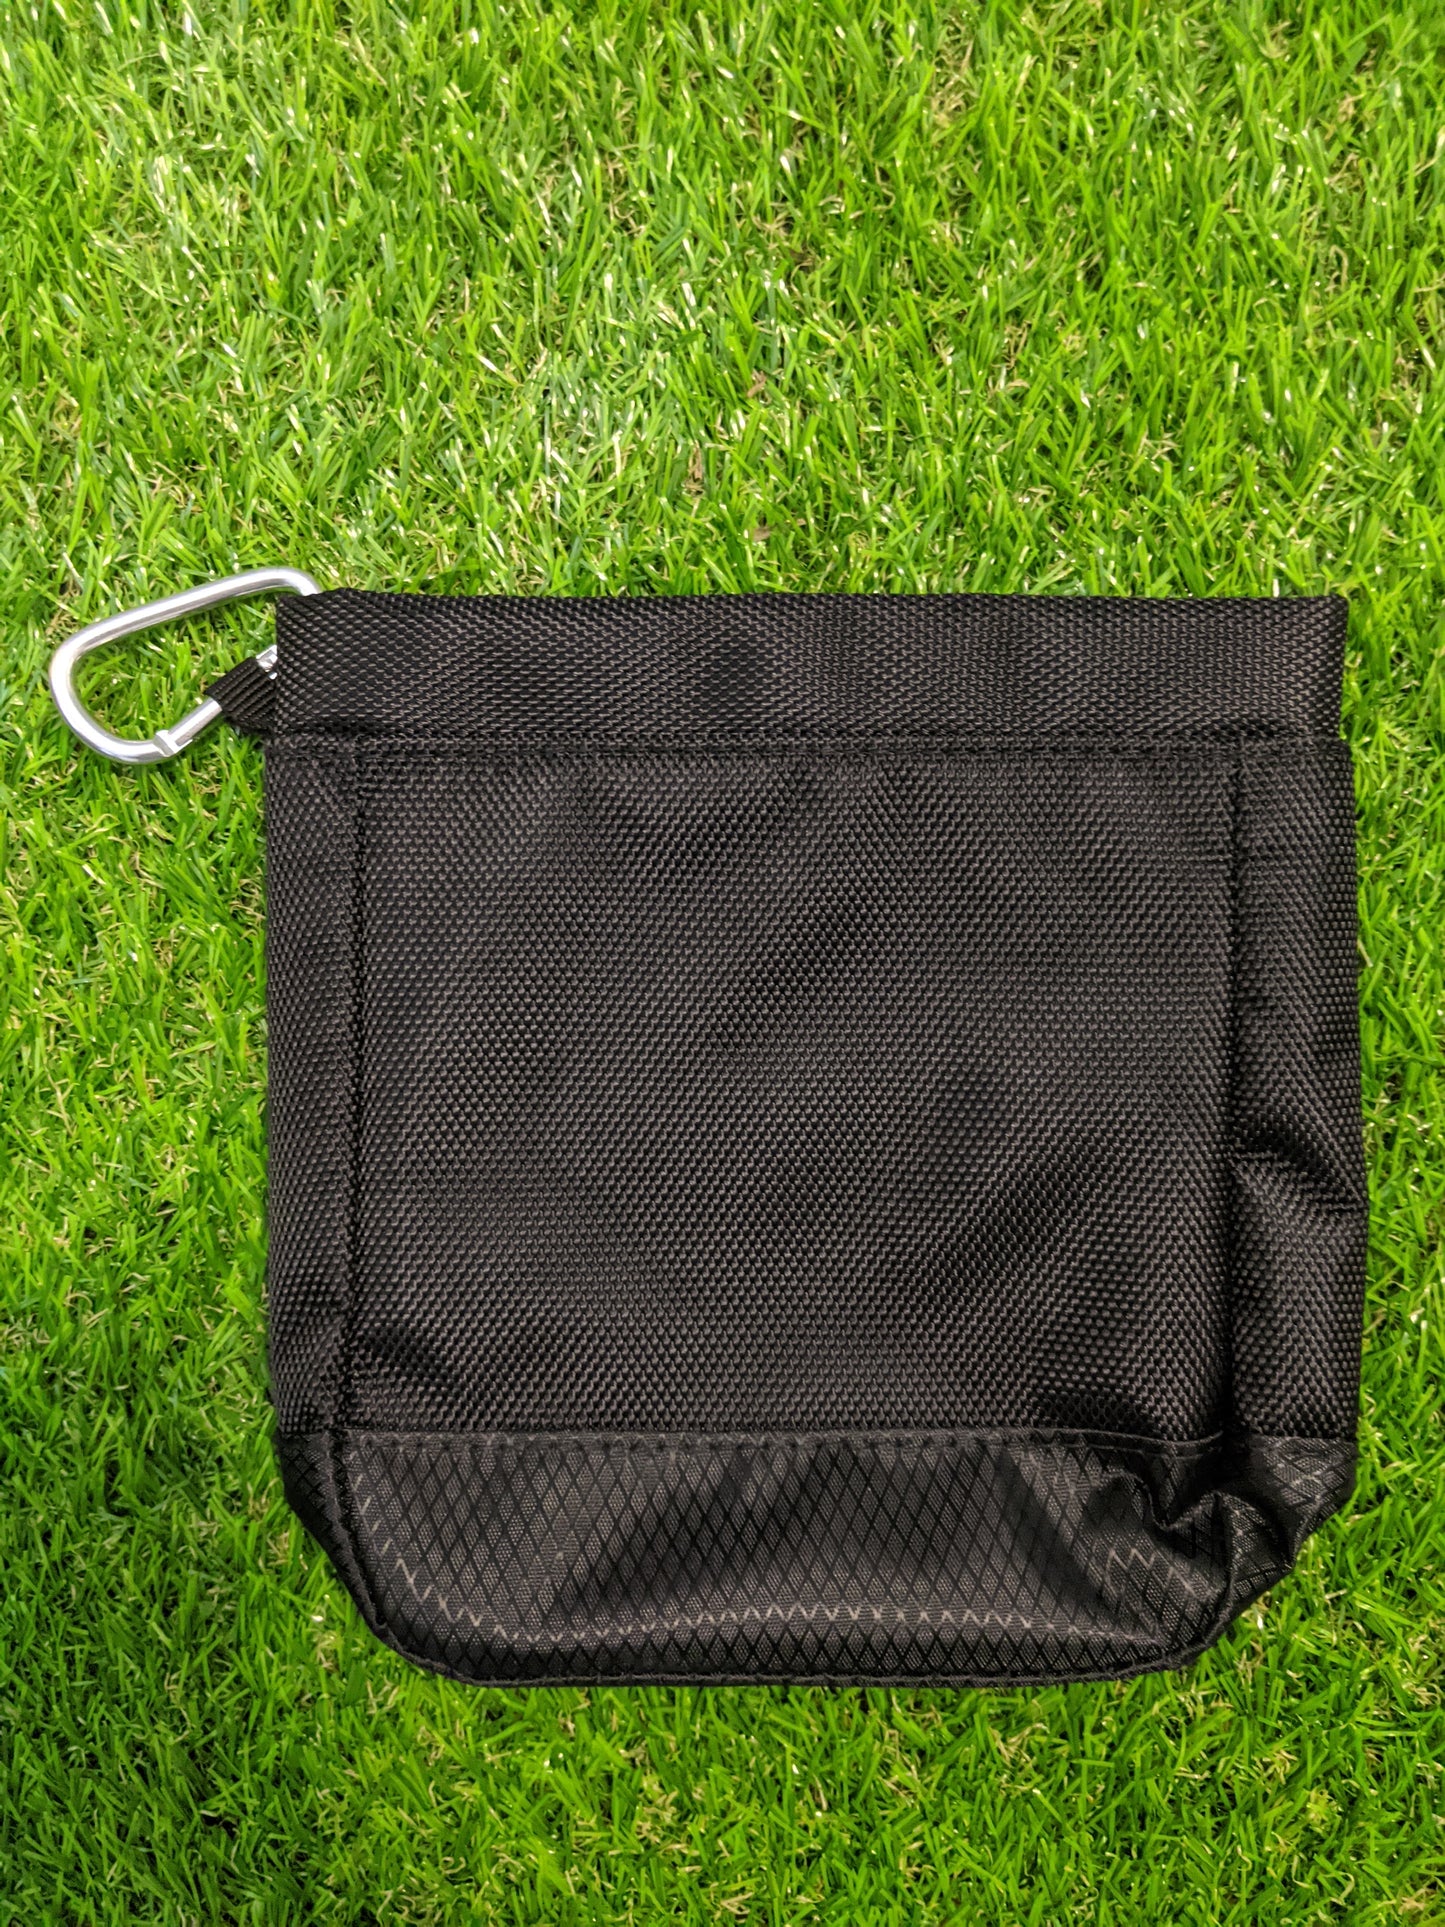 Golf Ball Cleaning Pouch Washer Water Storage Clip Club Wet Tees Bag Marker